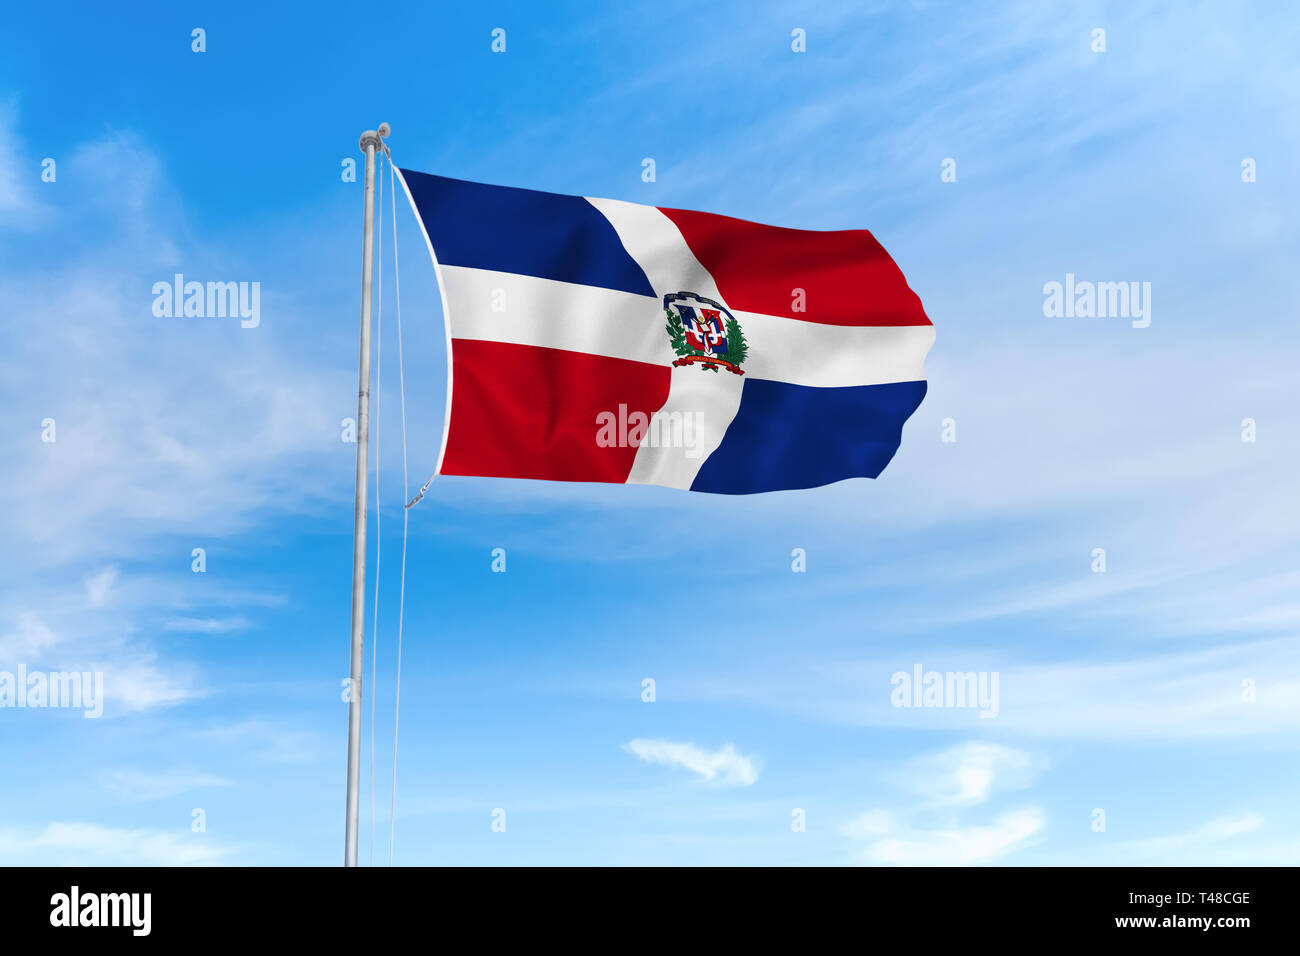 Dominican Republic flag blowing in the wind over nice blue sky background Stock Photo